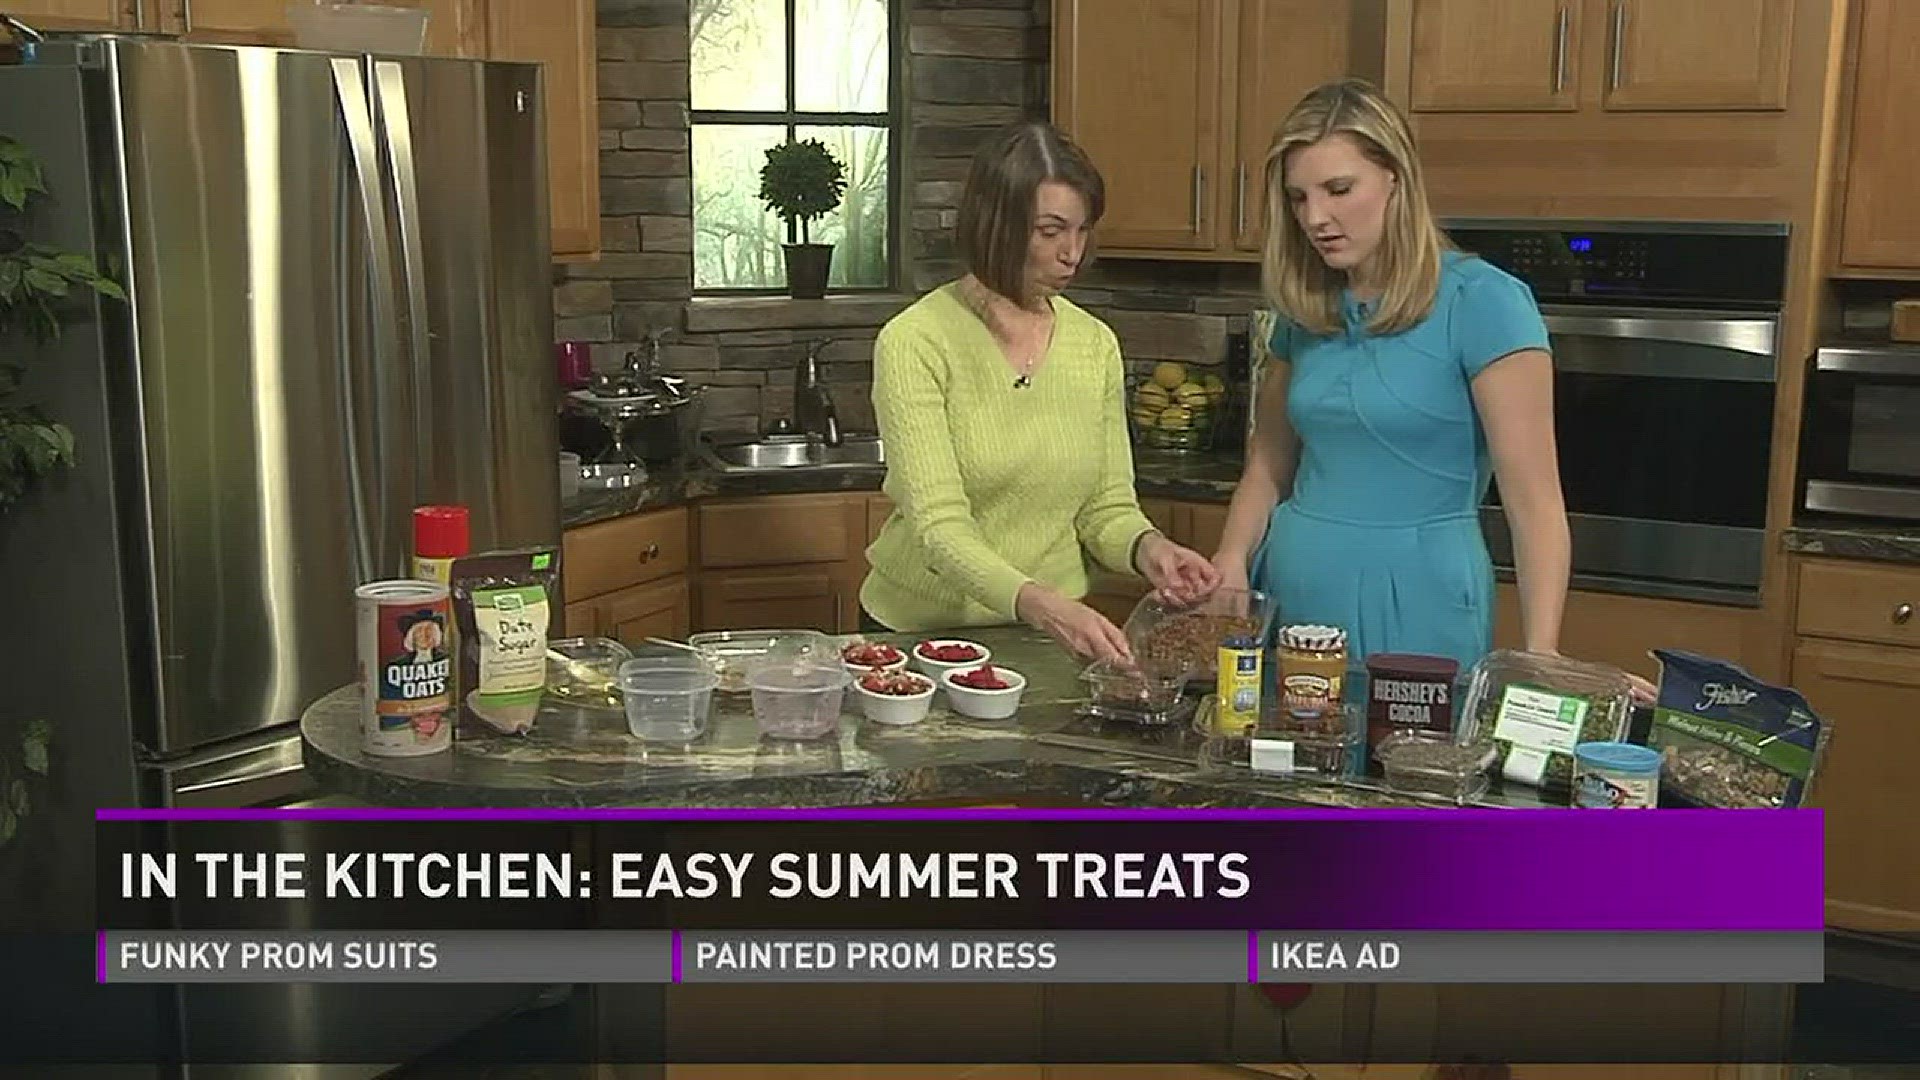 Linda Quimby, a clinical dietician at the University of Tennessee, shows how to make some easy summer treats.